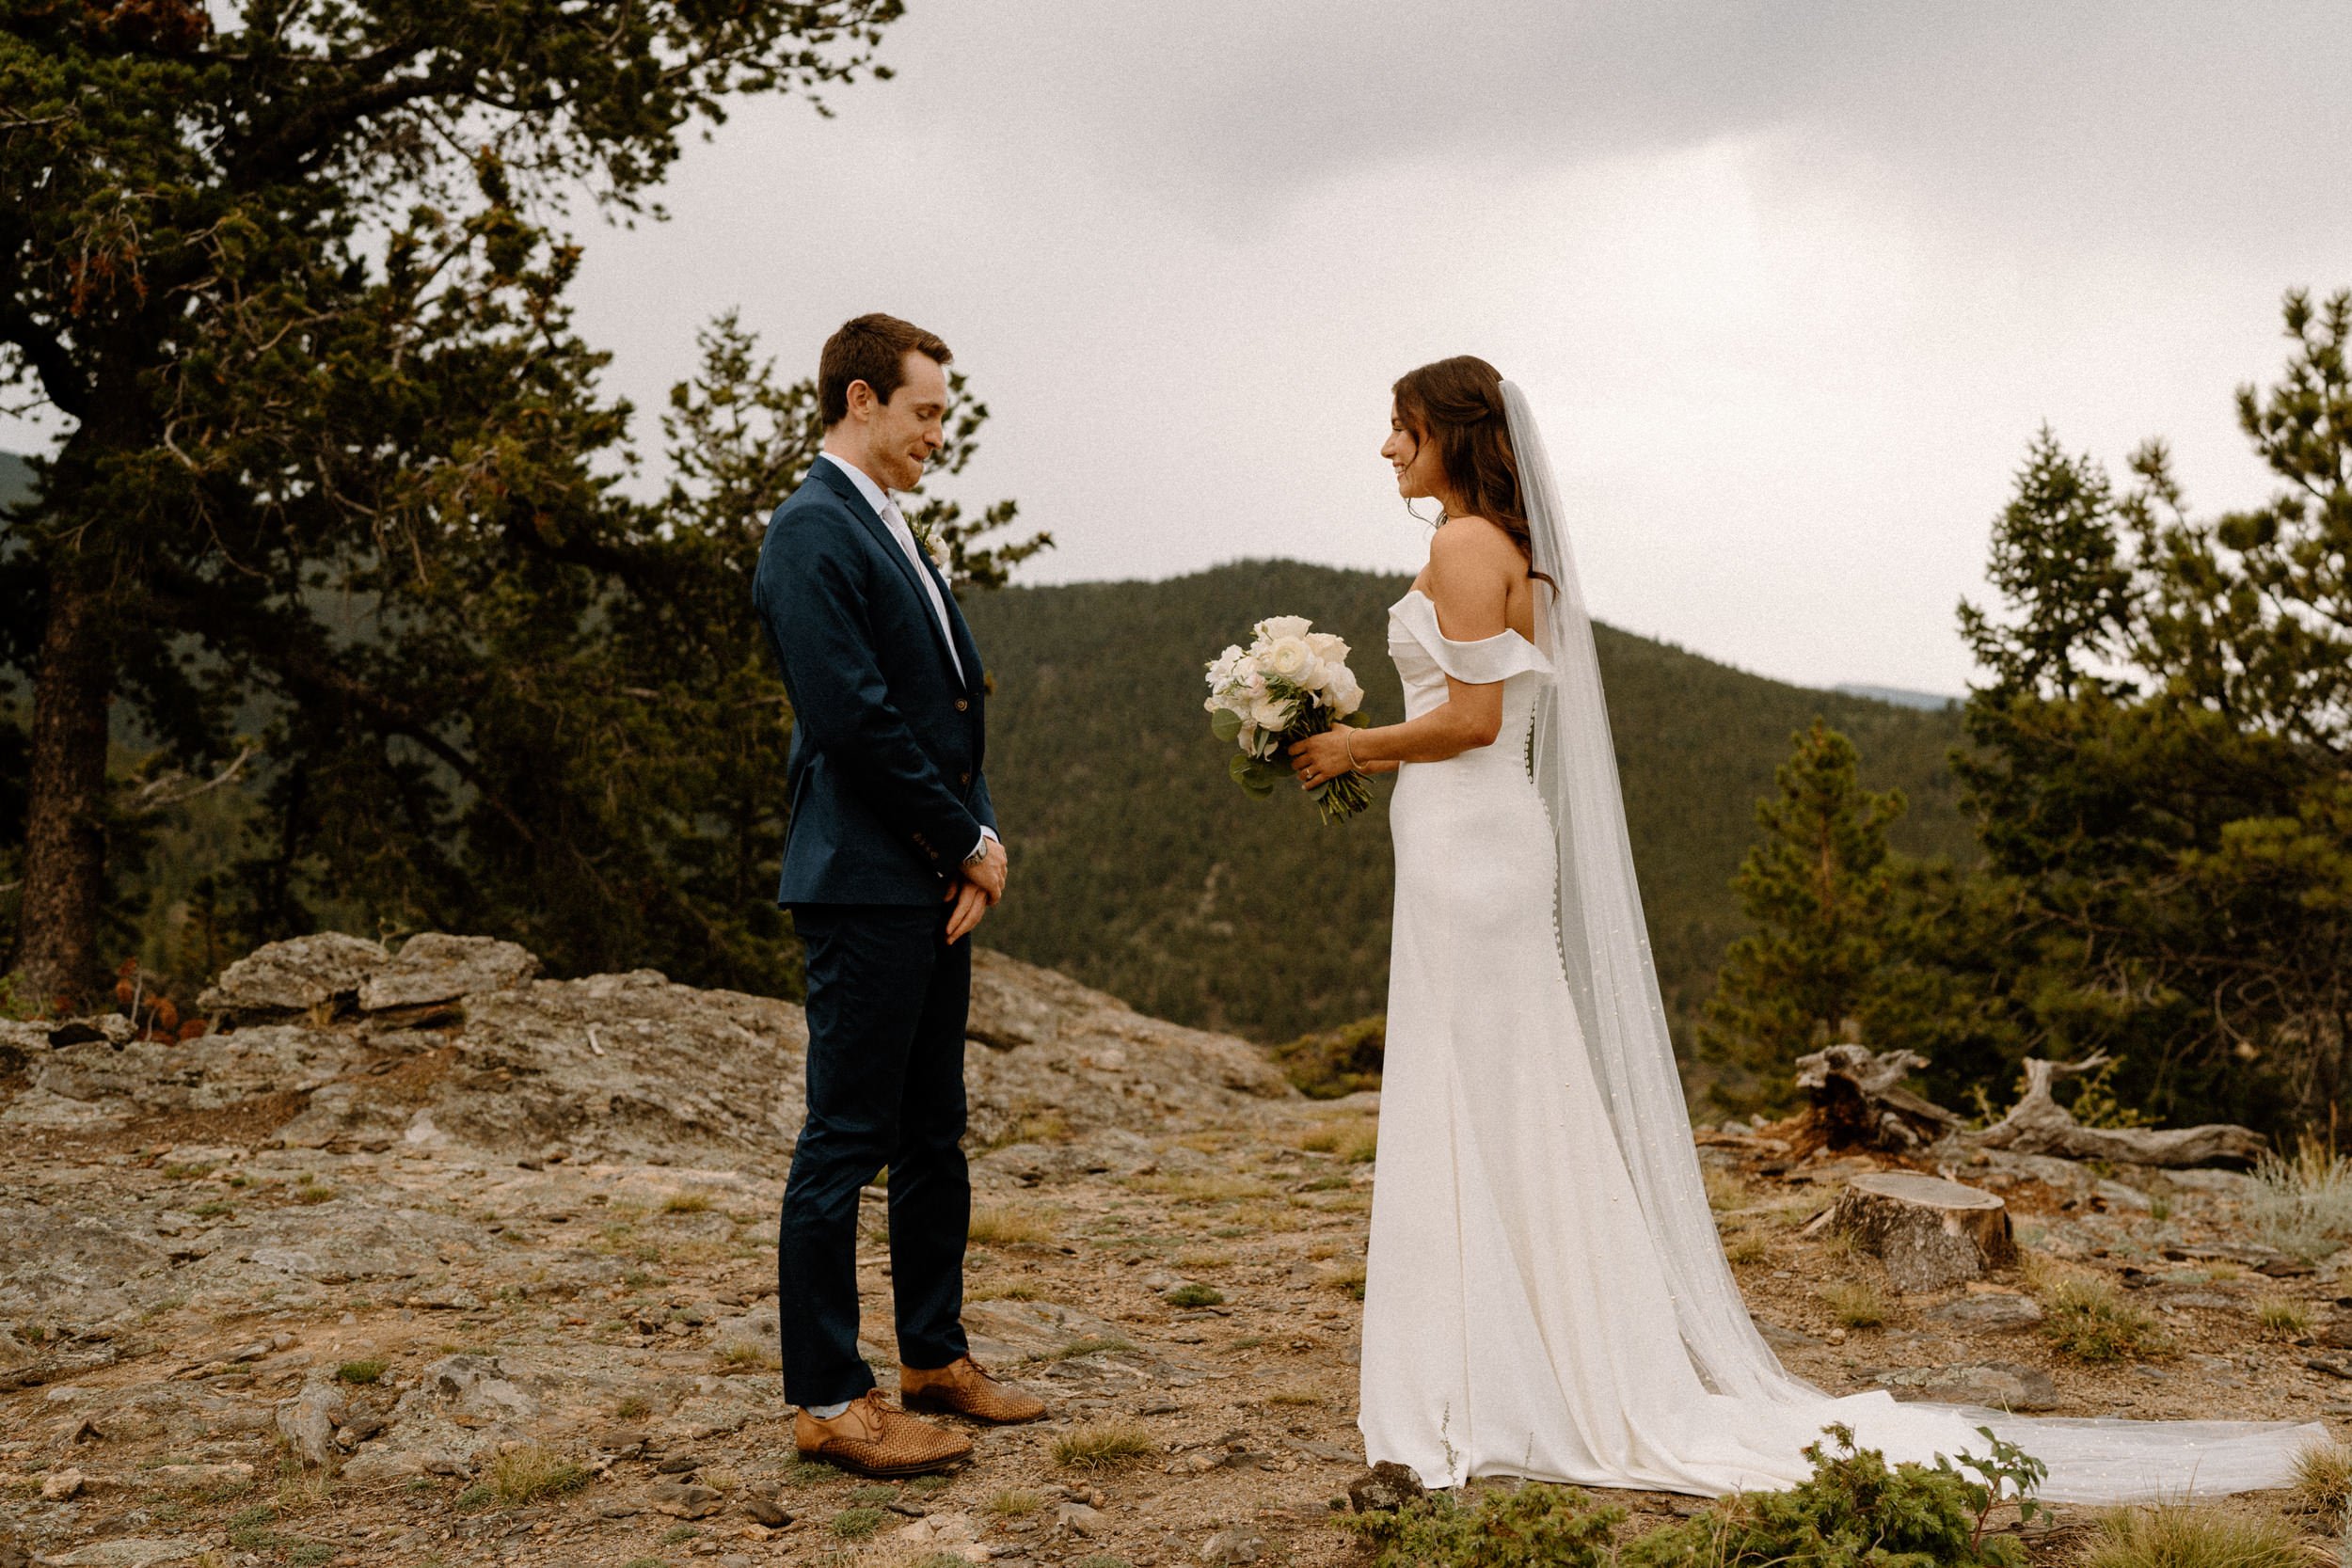 The groom turns to see the bride for the first time outside of North Star Gatherings in Idaho Springs, CO